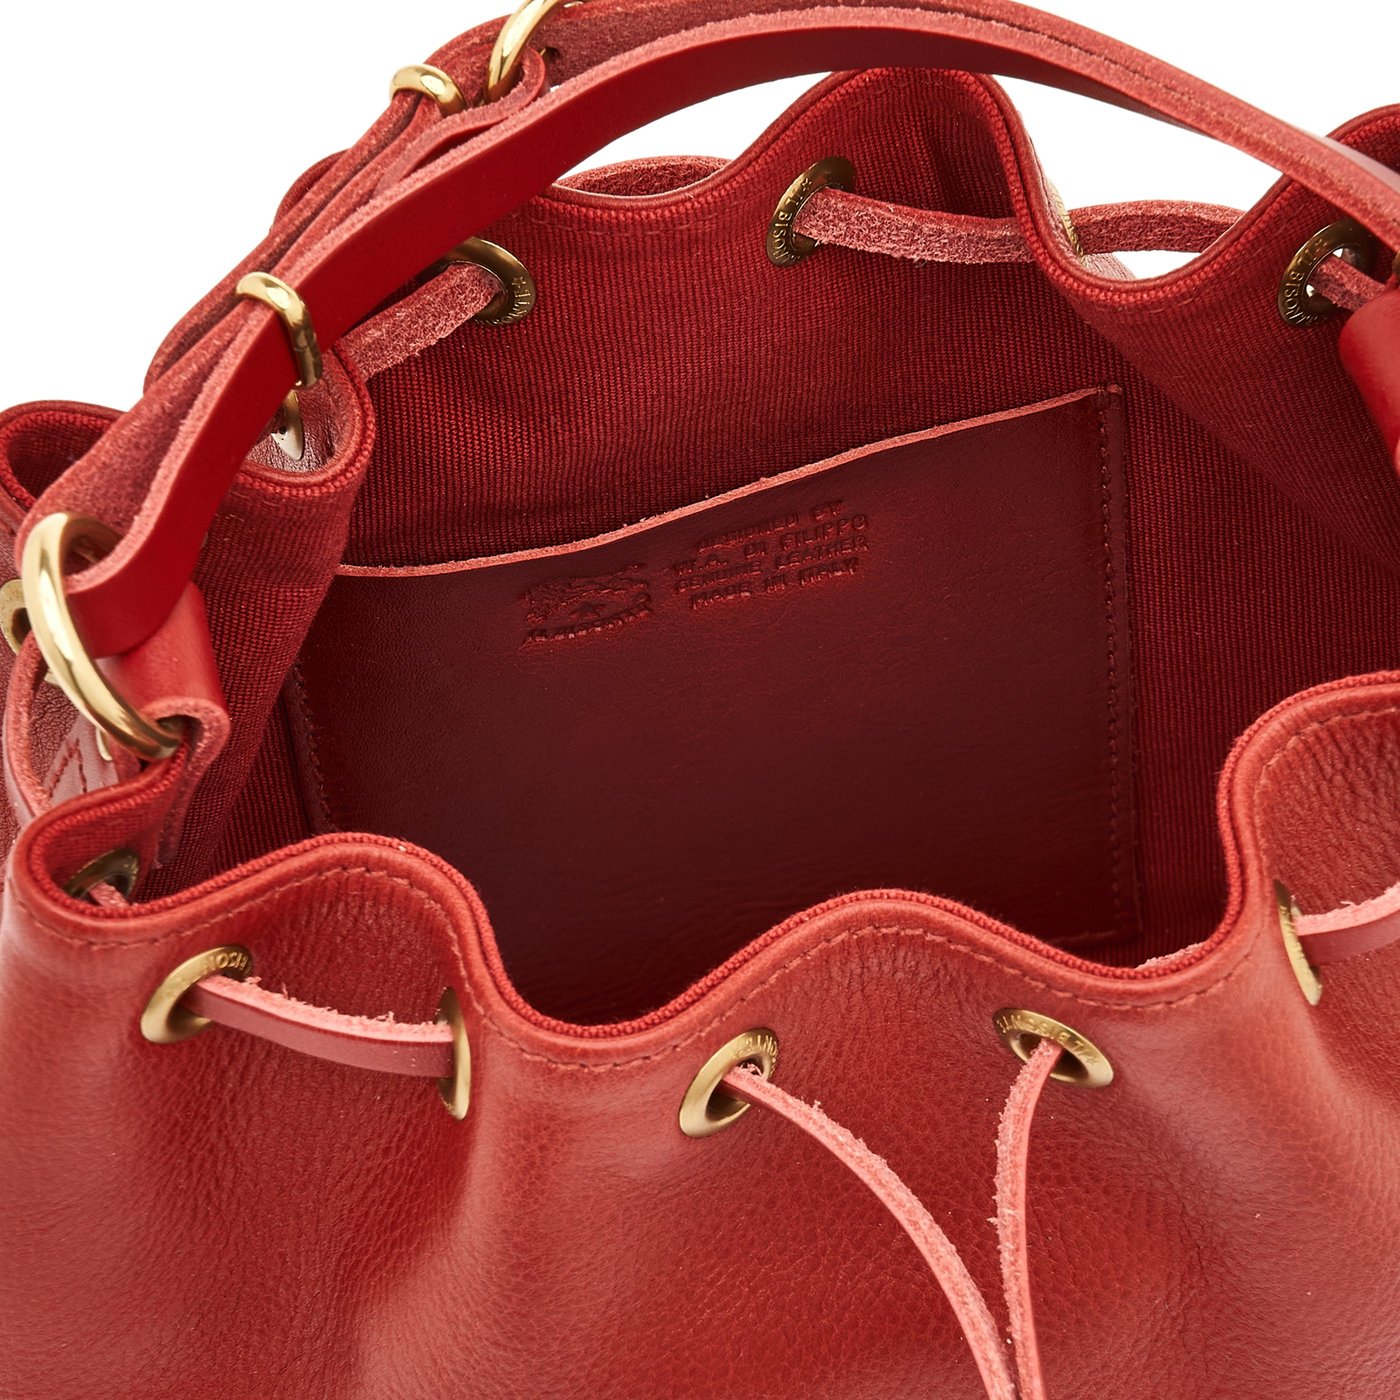 Women's bucket bag in leather color red – Il Bisonte